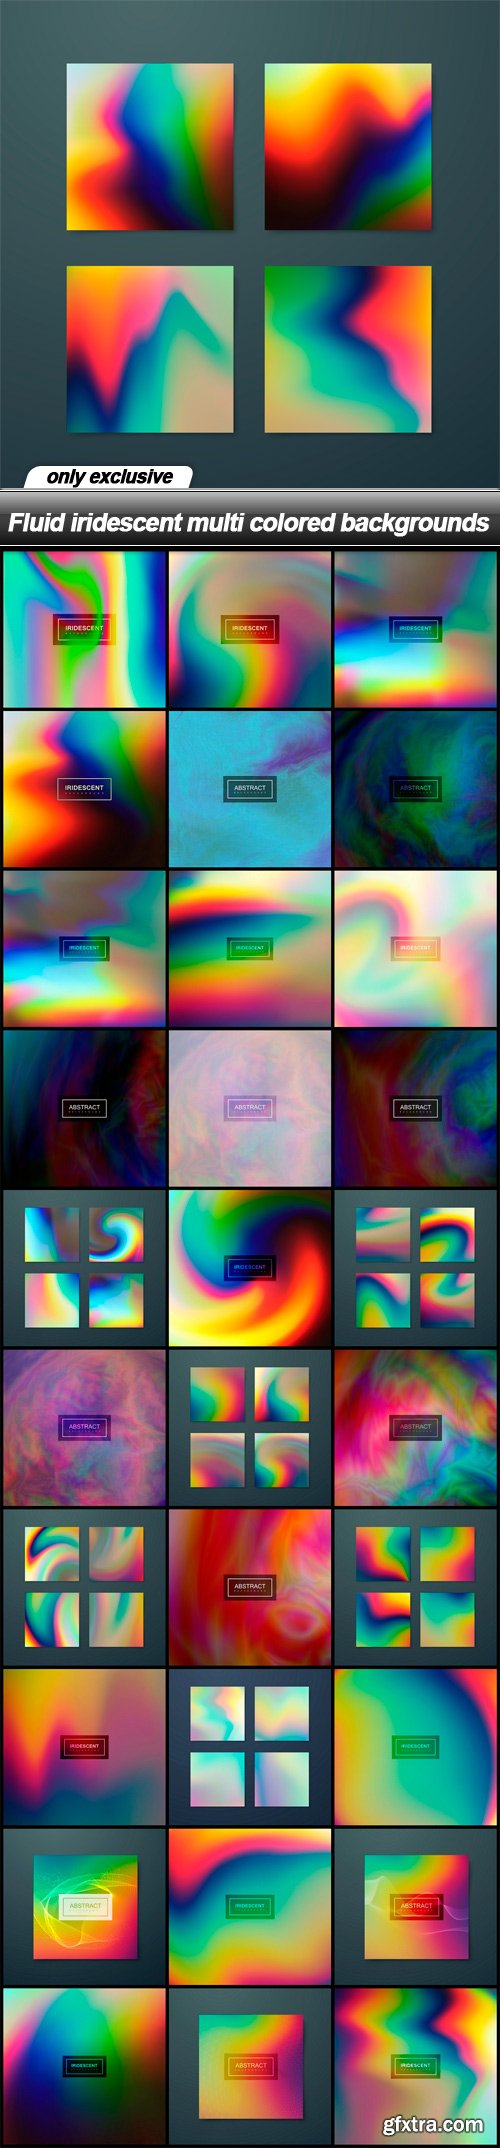 Fluid iridescent multi colored backgrounds - 31 EPS